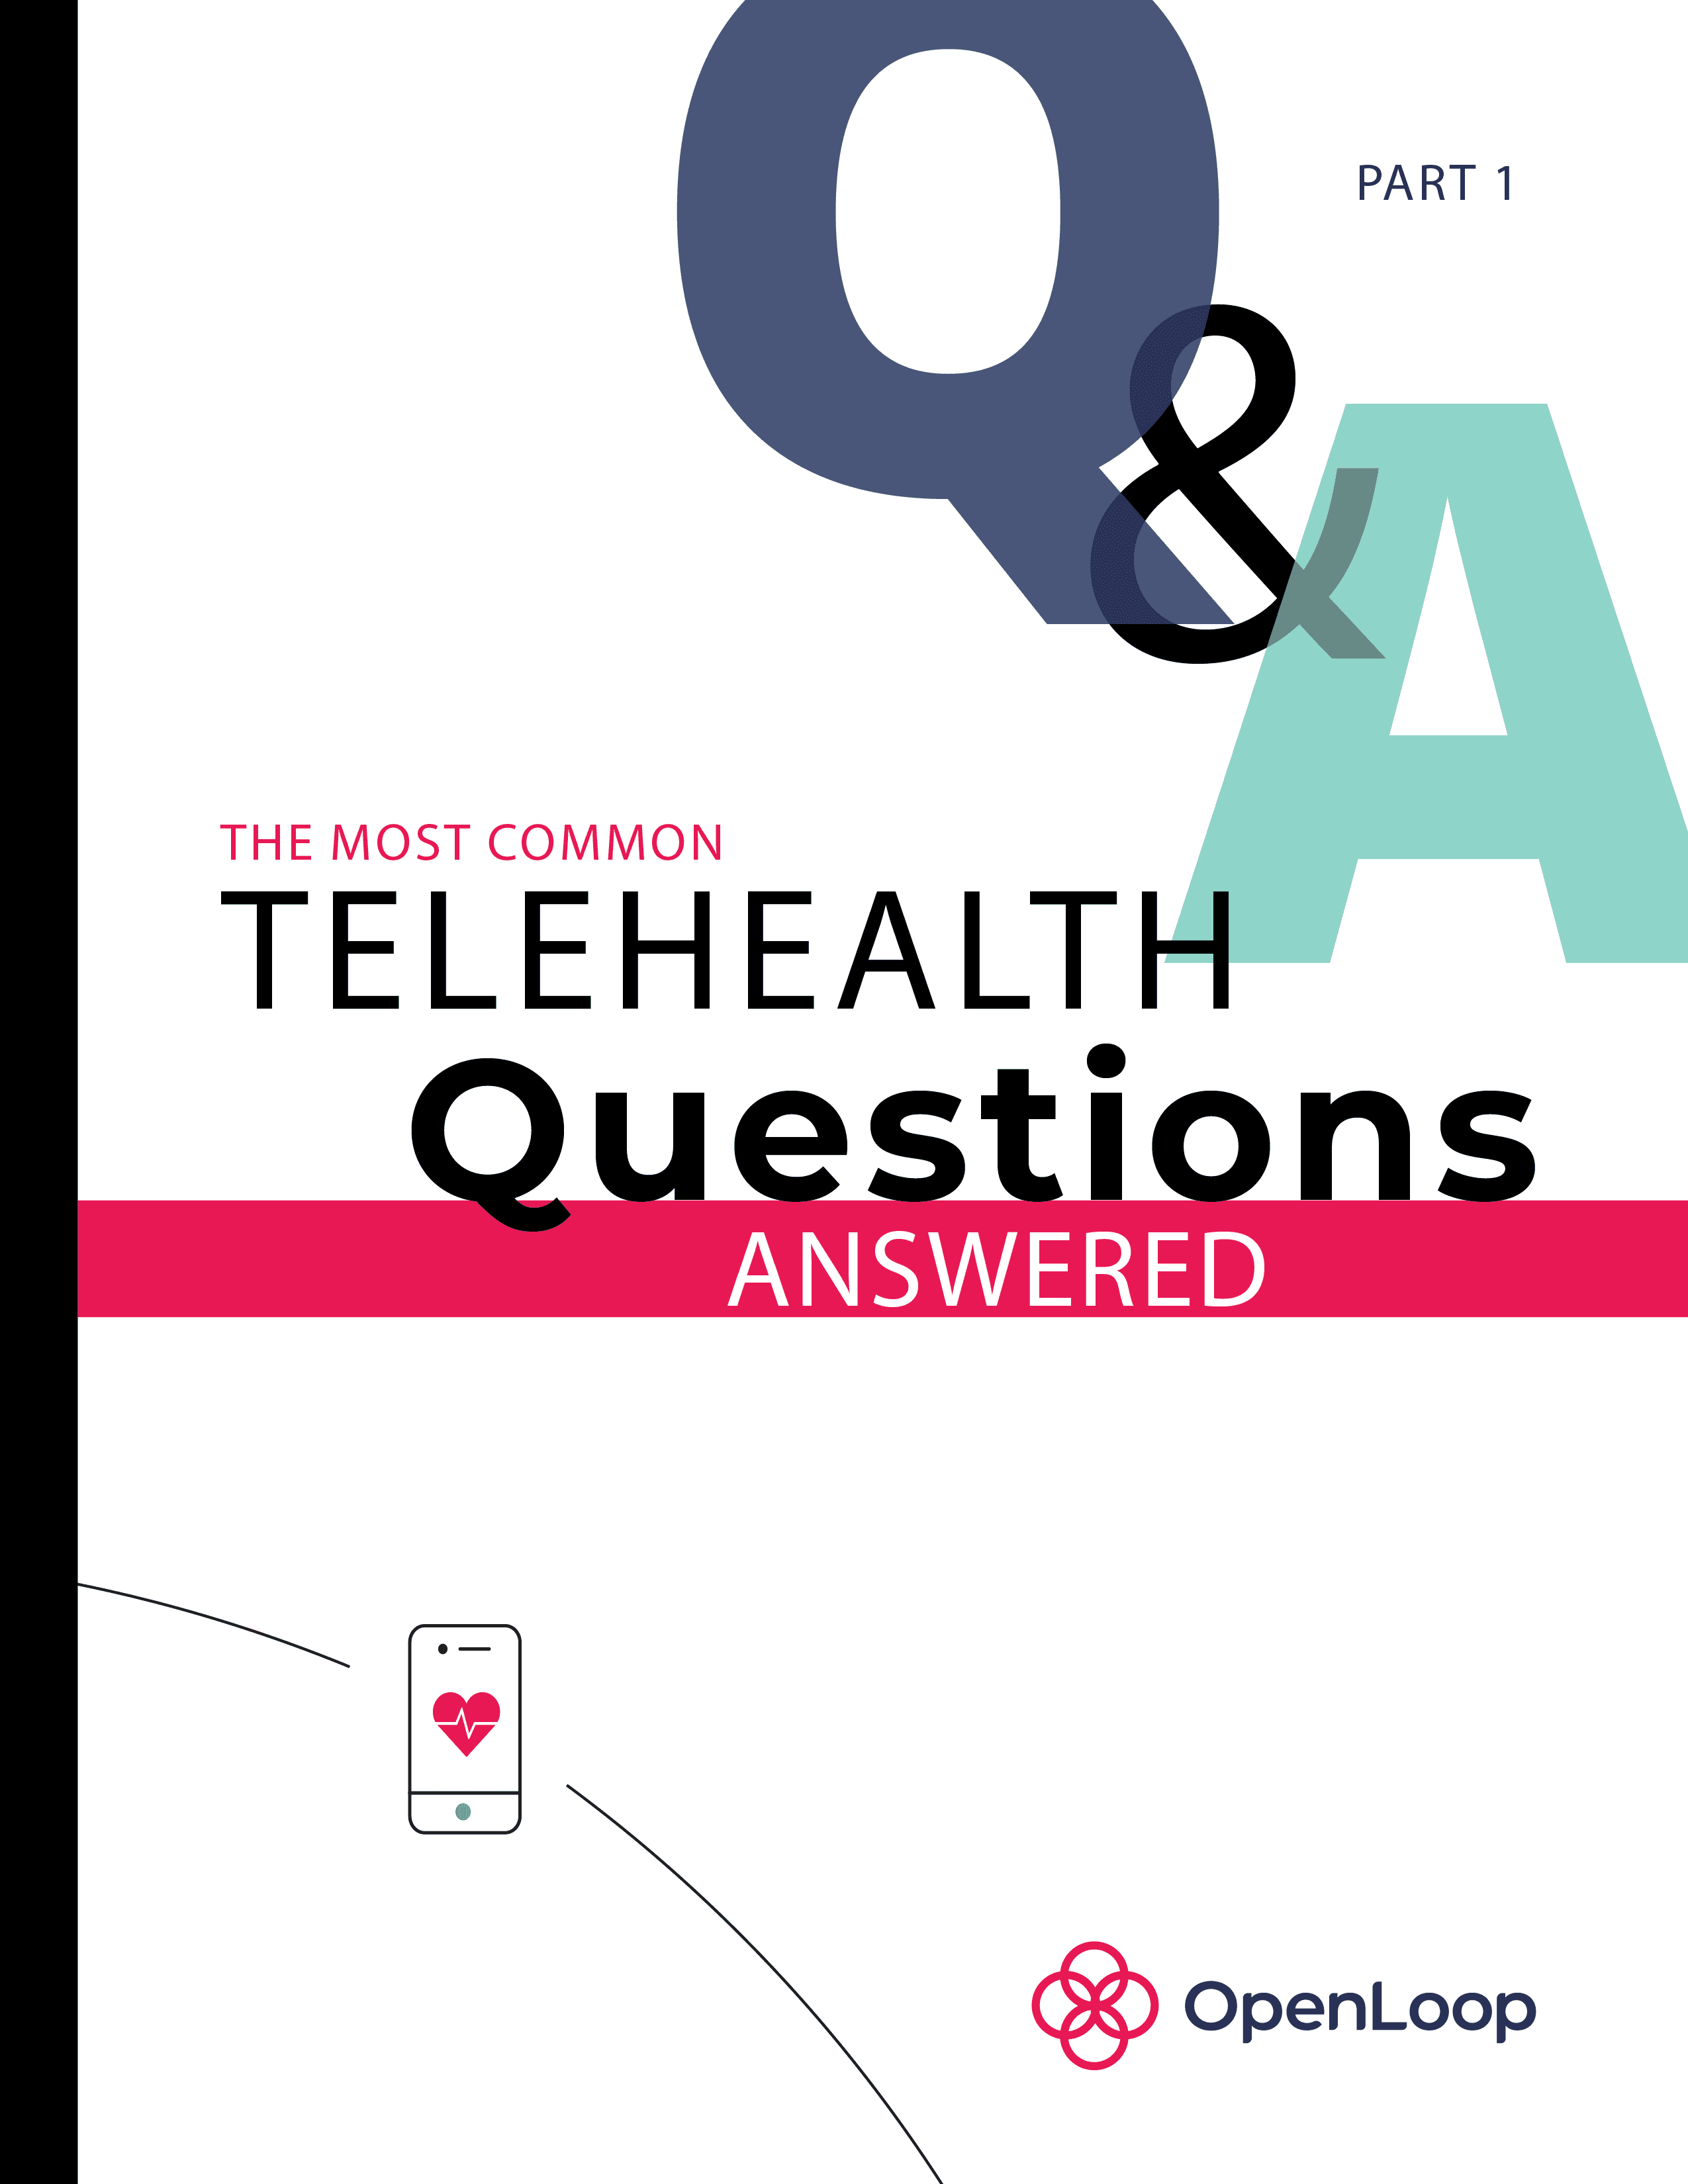 TheMost Common Telehealth Questions Answered (1)